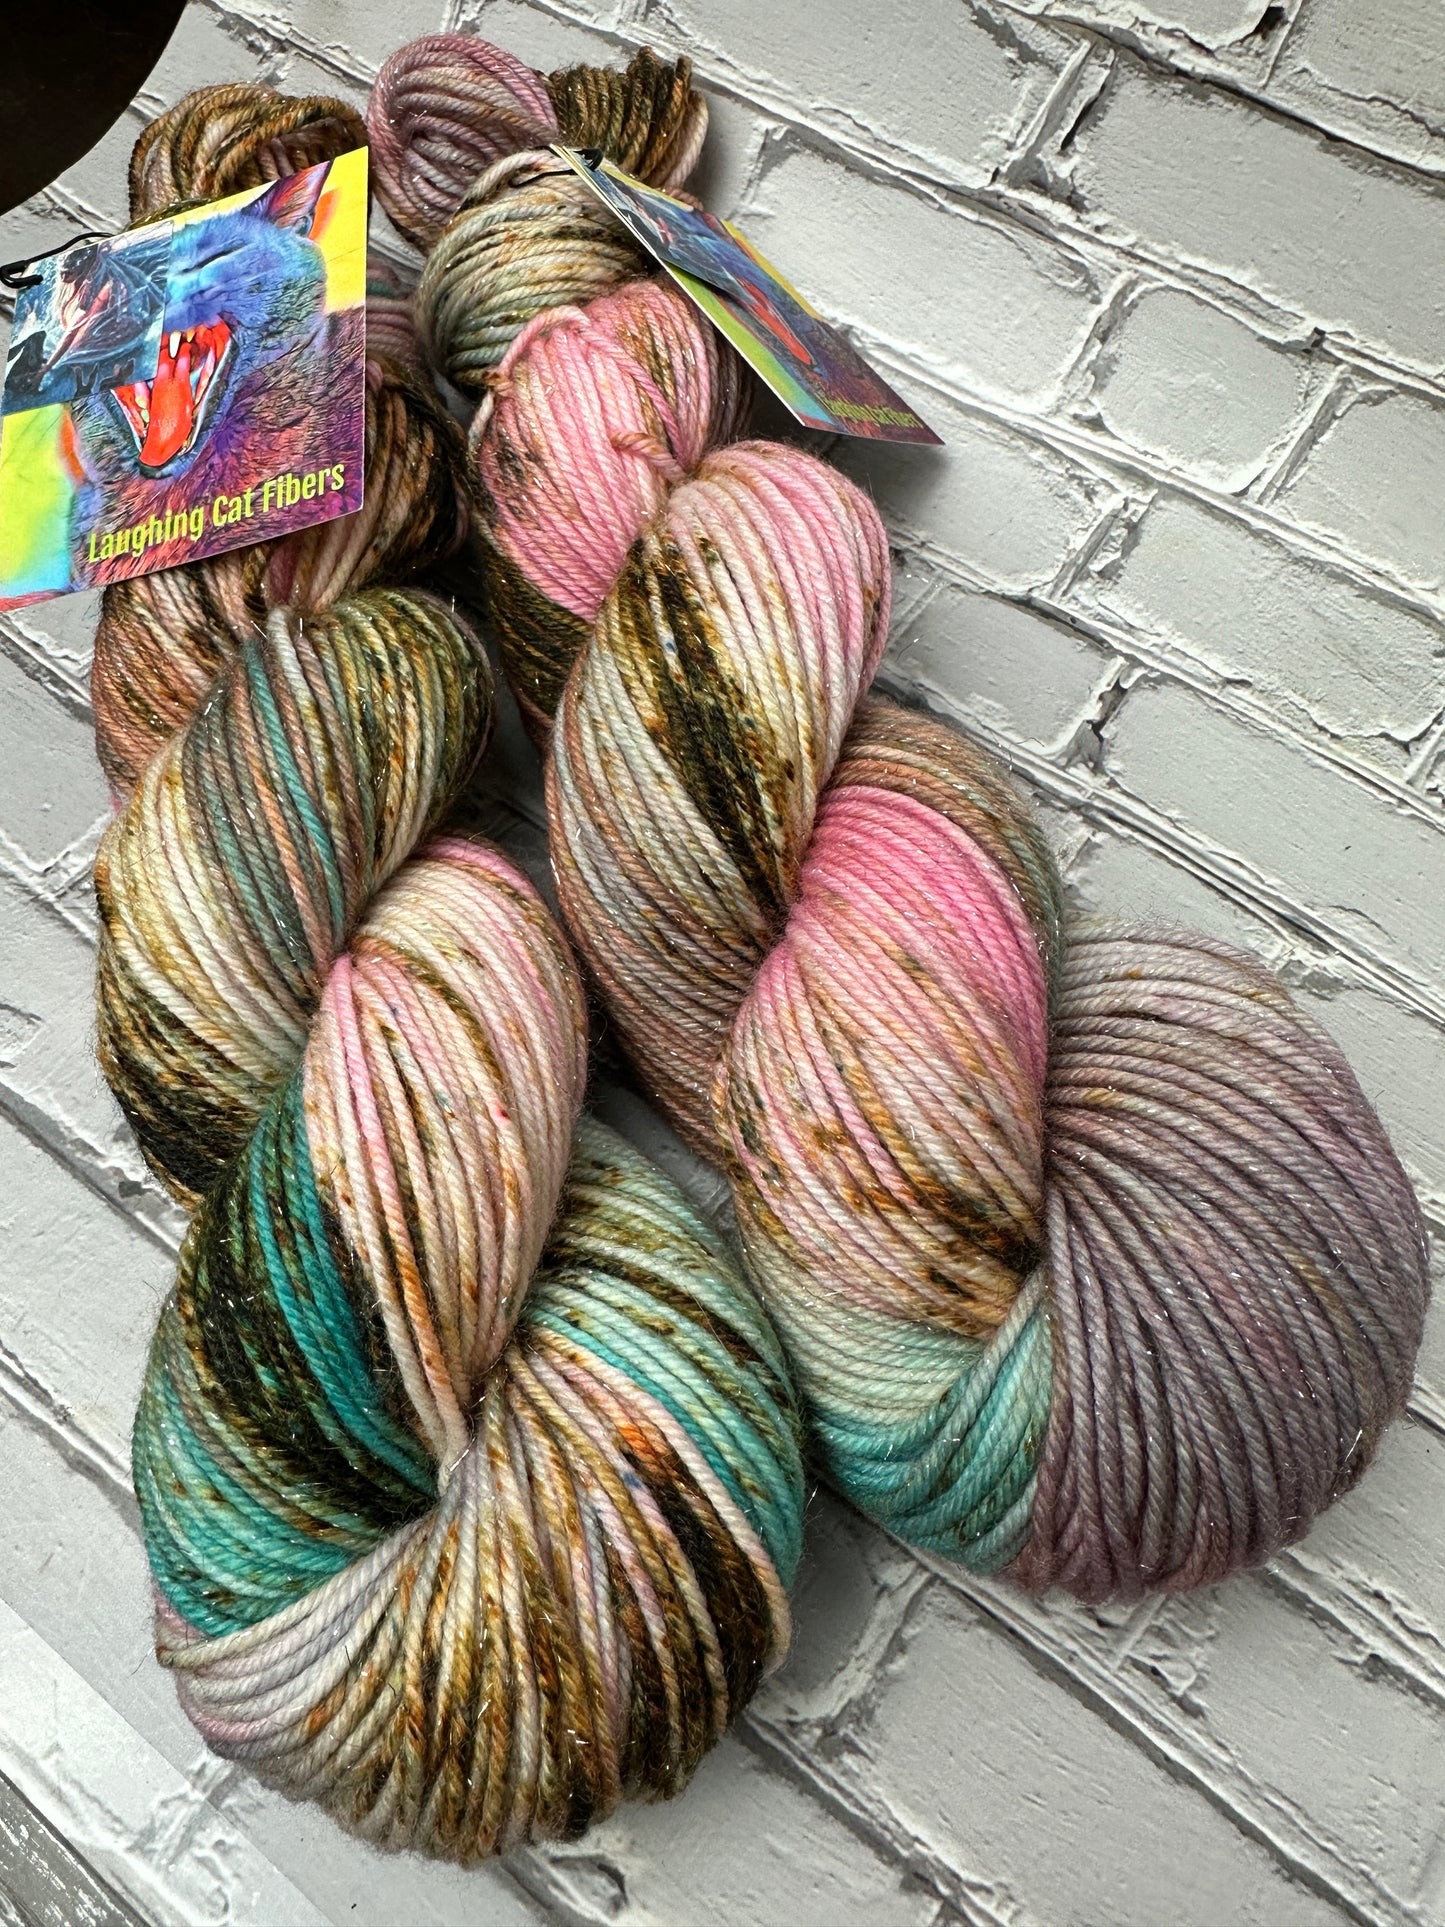 "The Fae of Rabbits" on Various Yarn Bases